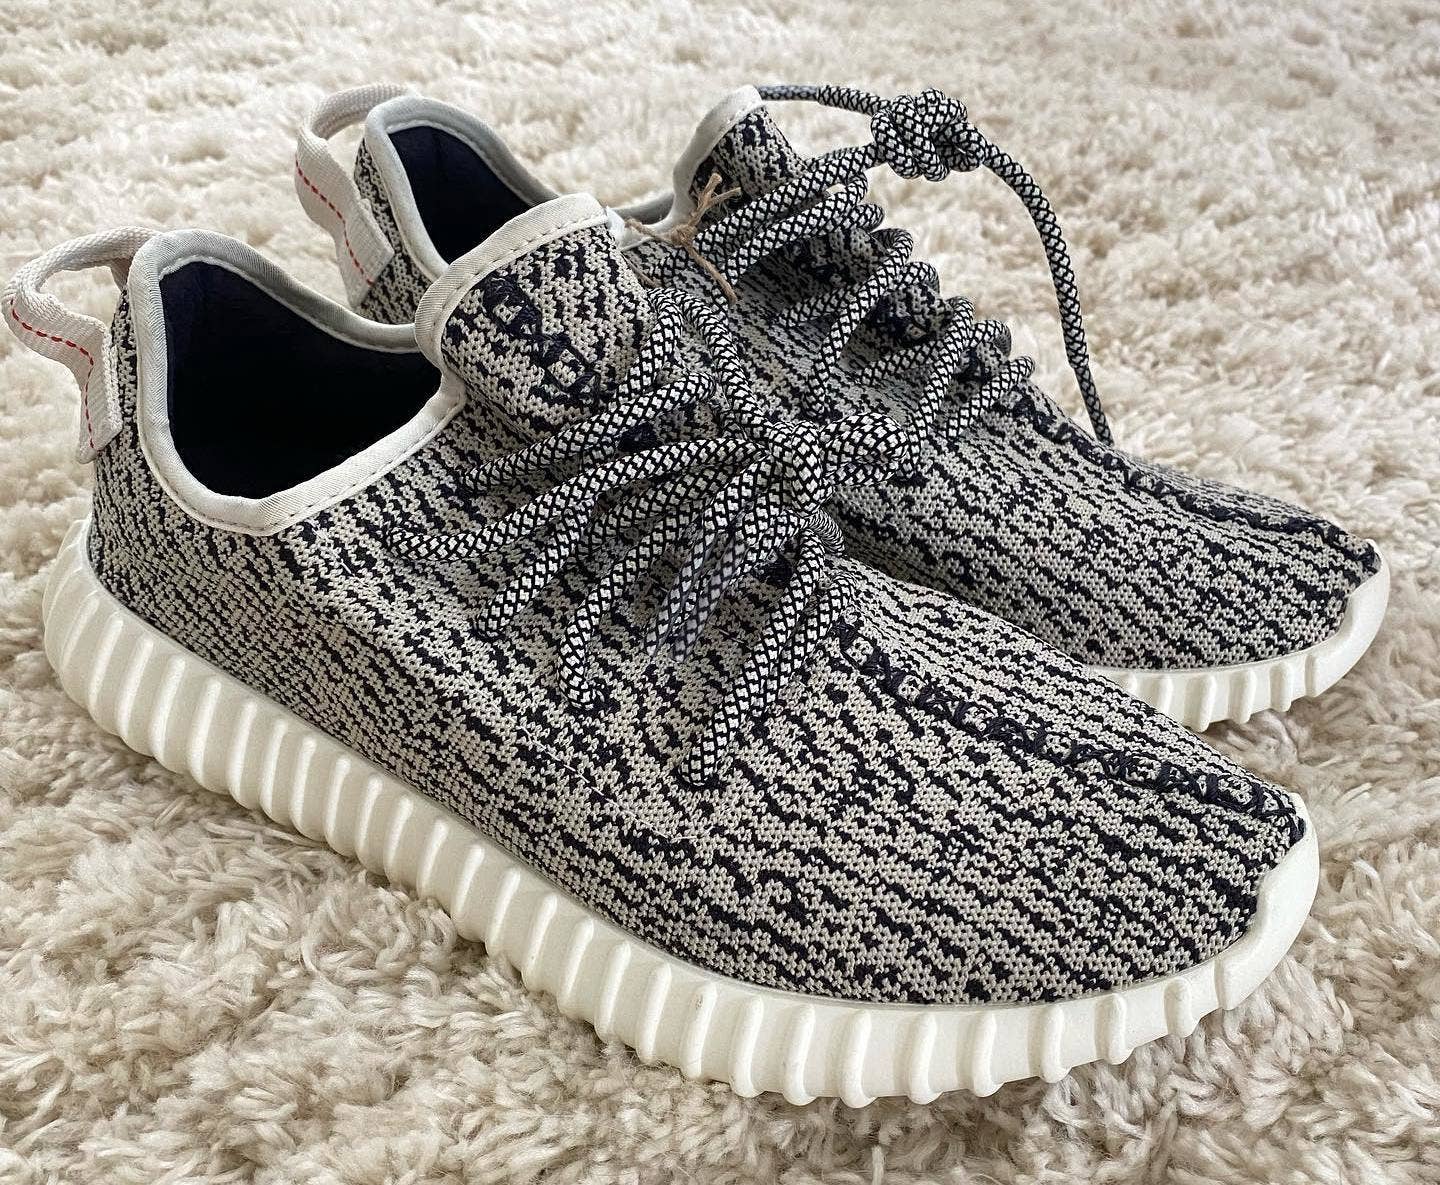 Detailed Look This Year's 'Turtle Dove' Boost | Complex